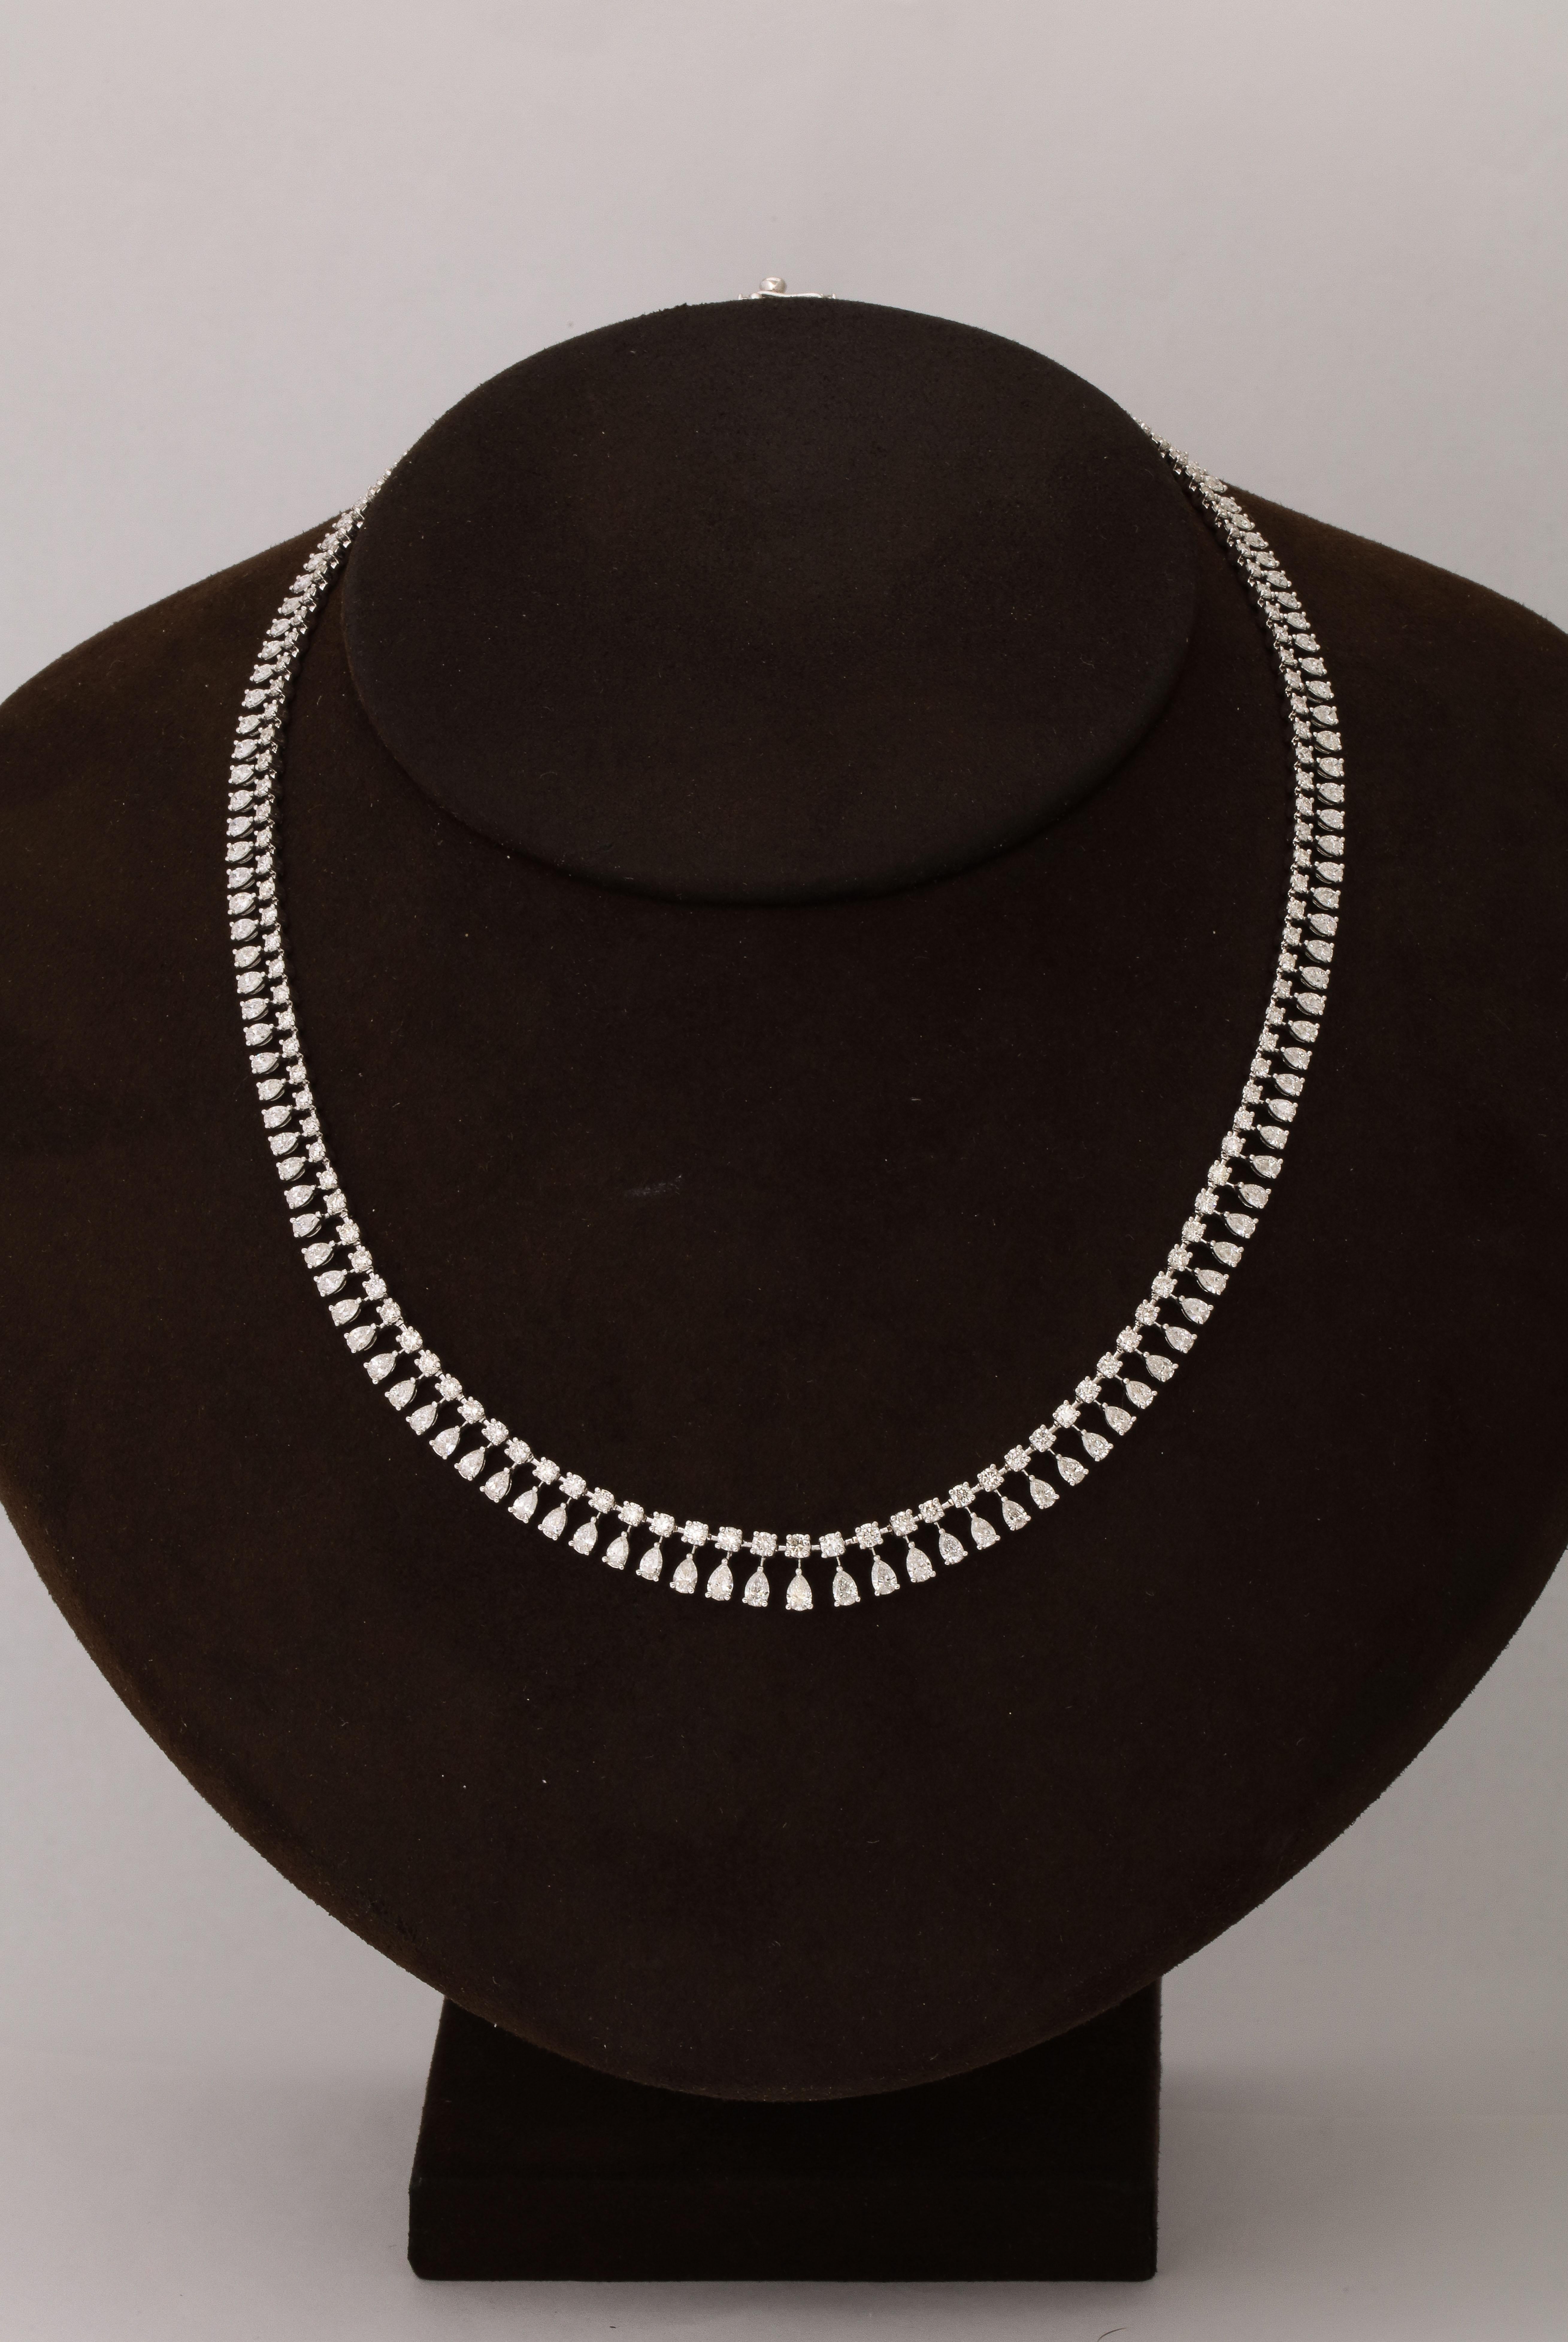 
A Fabulous choker layered or worn on its own! 

10.83 carats of white round and pear shape diamonds set in 18k white gold.

15.5 inch length. 
 
